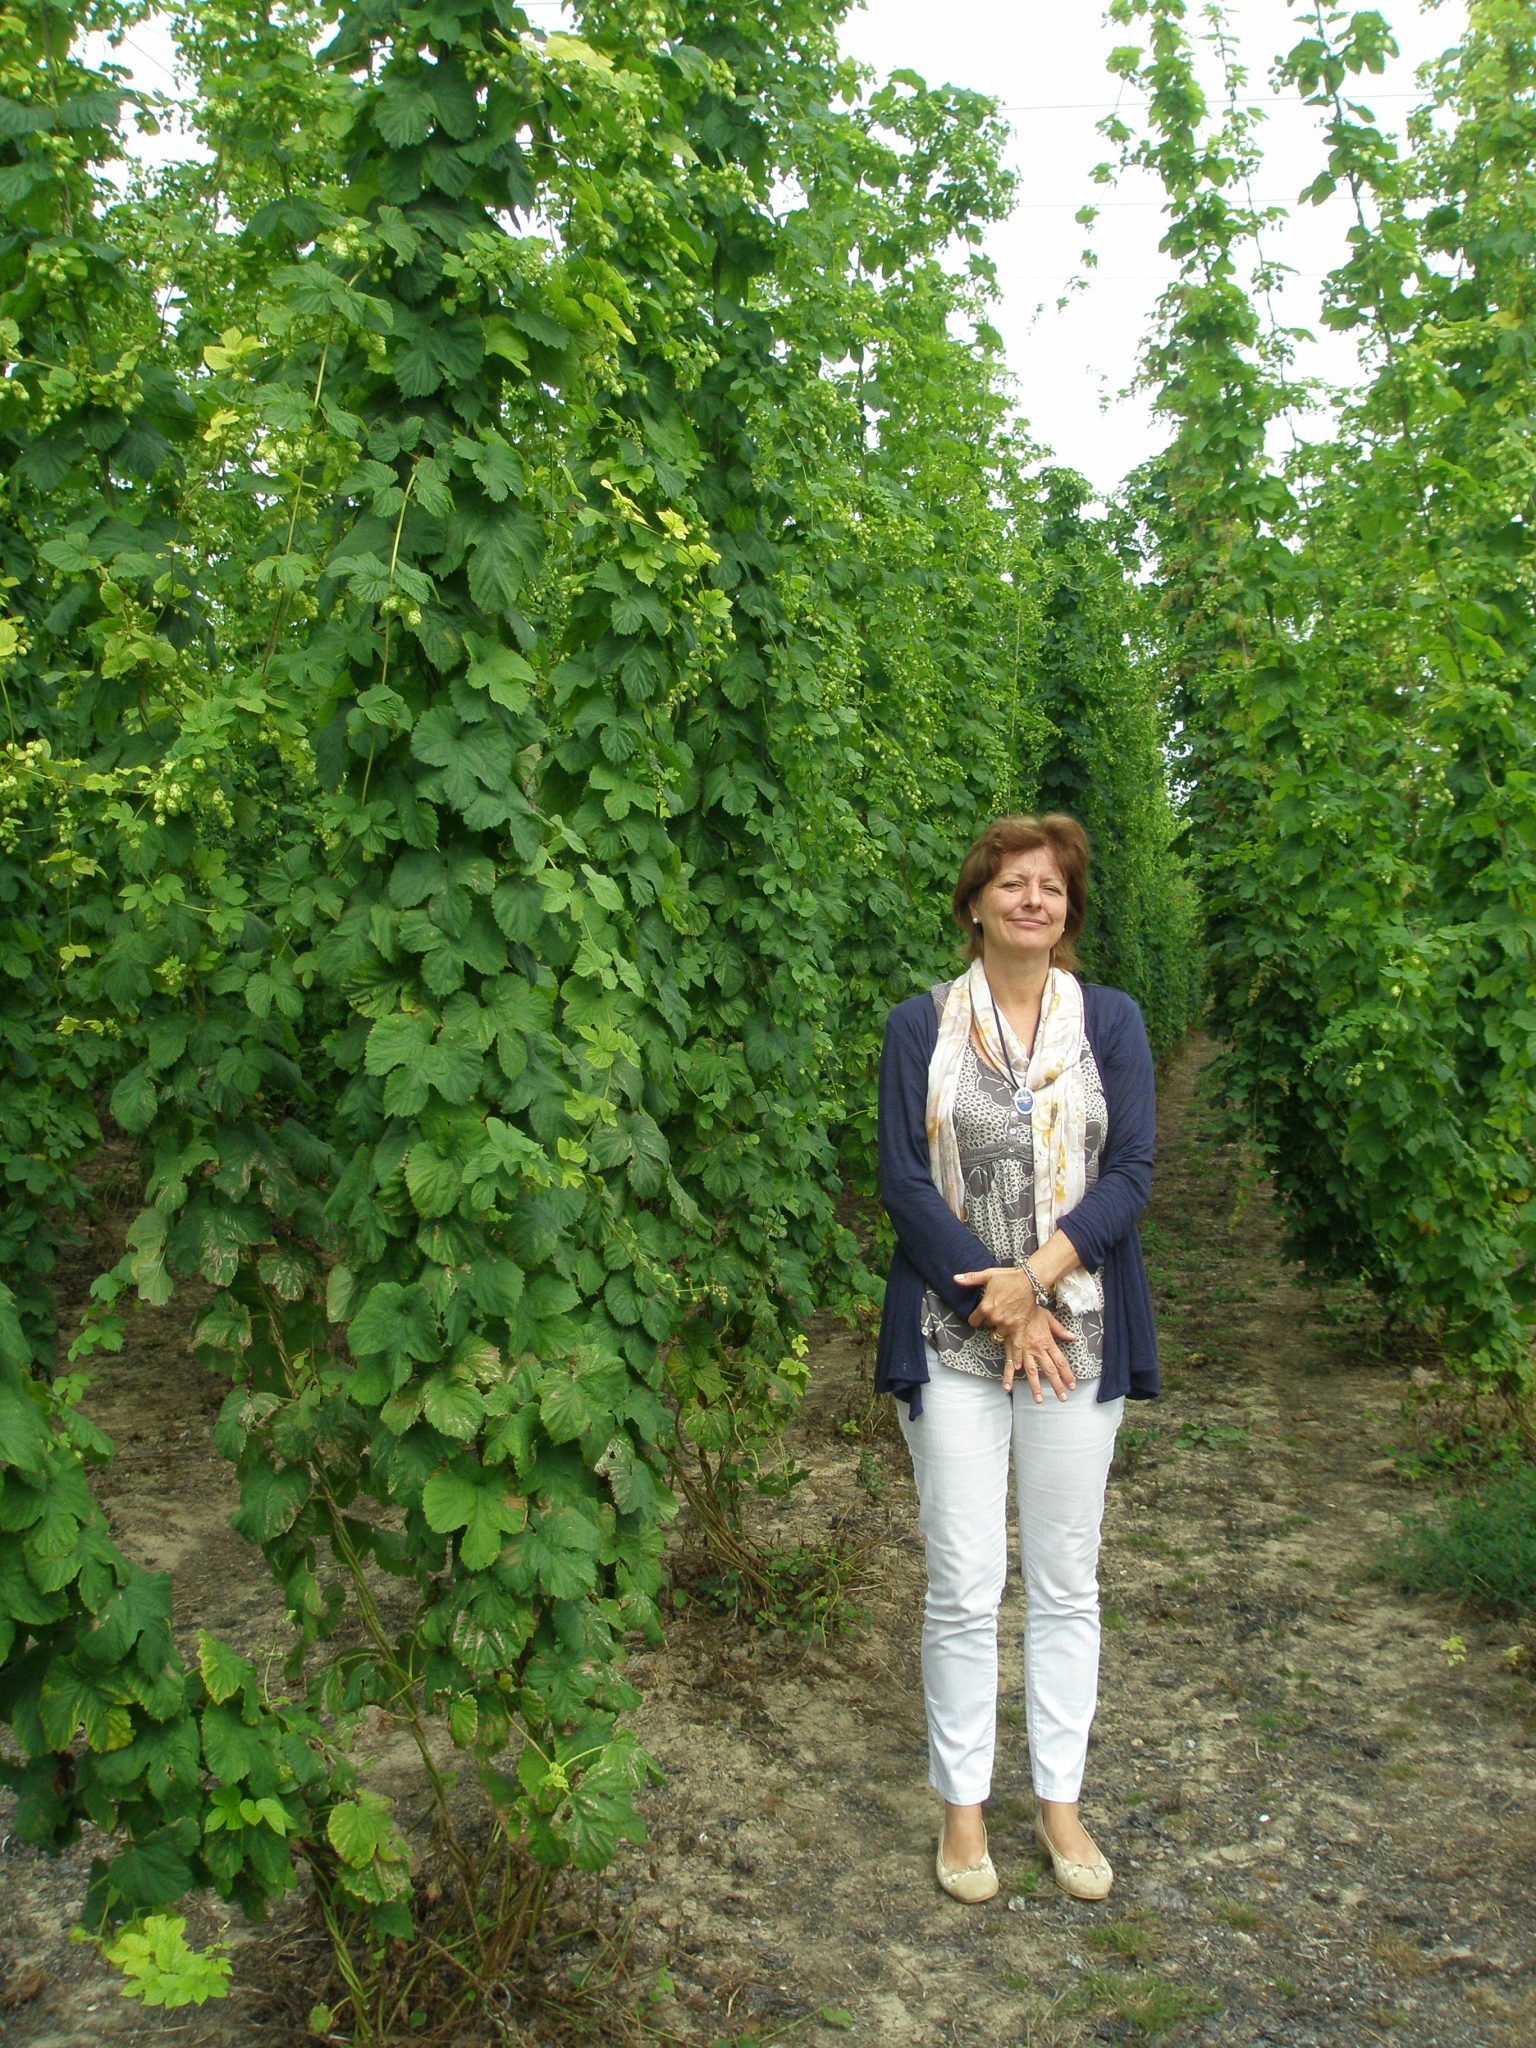 Amanda Hutchinson gamely provides human scale, in the Hop Garden at Sandhurst, on August 7th. Think of how much FUN it would be to walk down these paths on stilts!